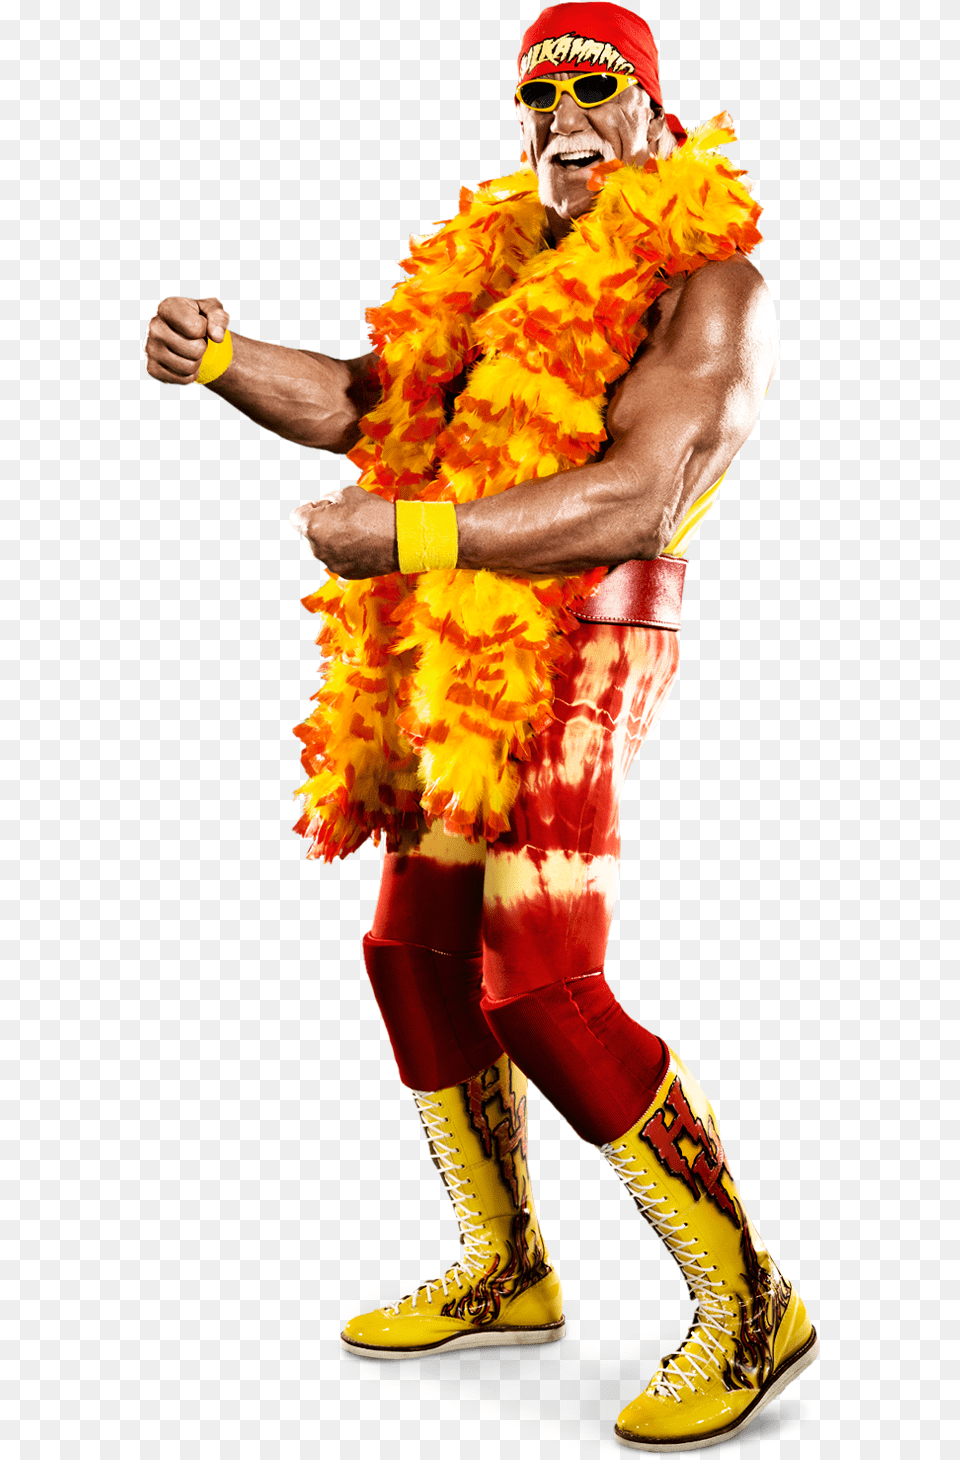 Post By Crappler El 0 M On Mar 13 2014 At Hulk Hogan Pro Wrestling, Accessories, Sunglasses, Person, Woman Free Png